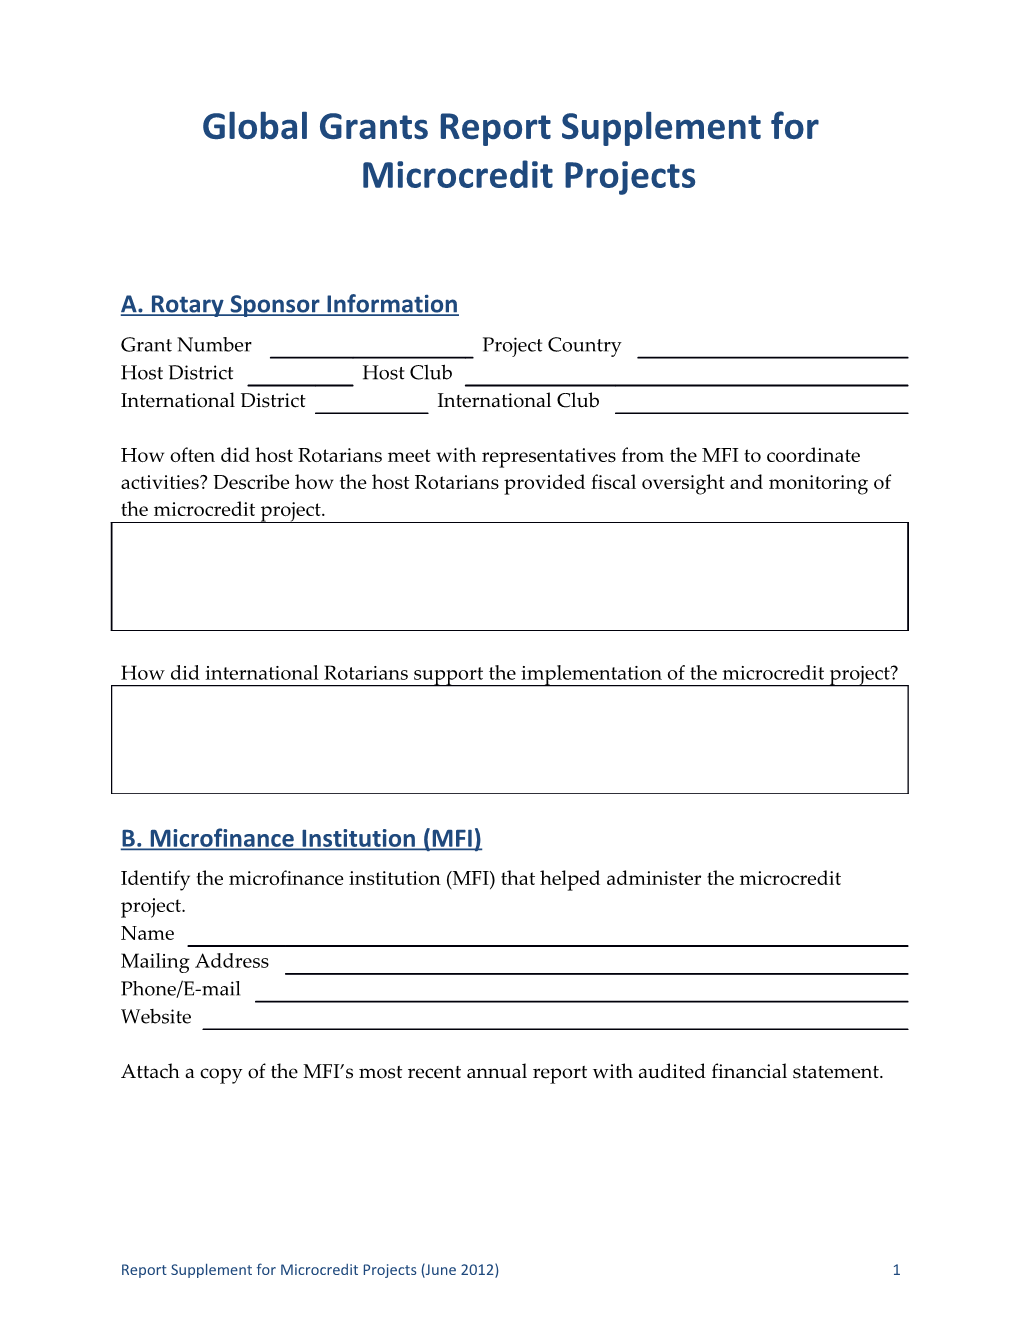 Report Supplement for Microcredit Projects